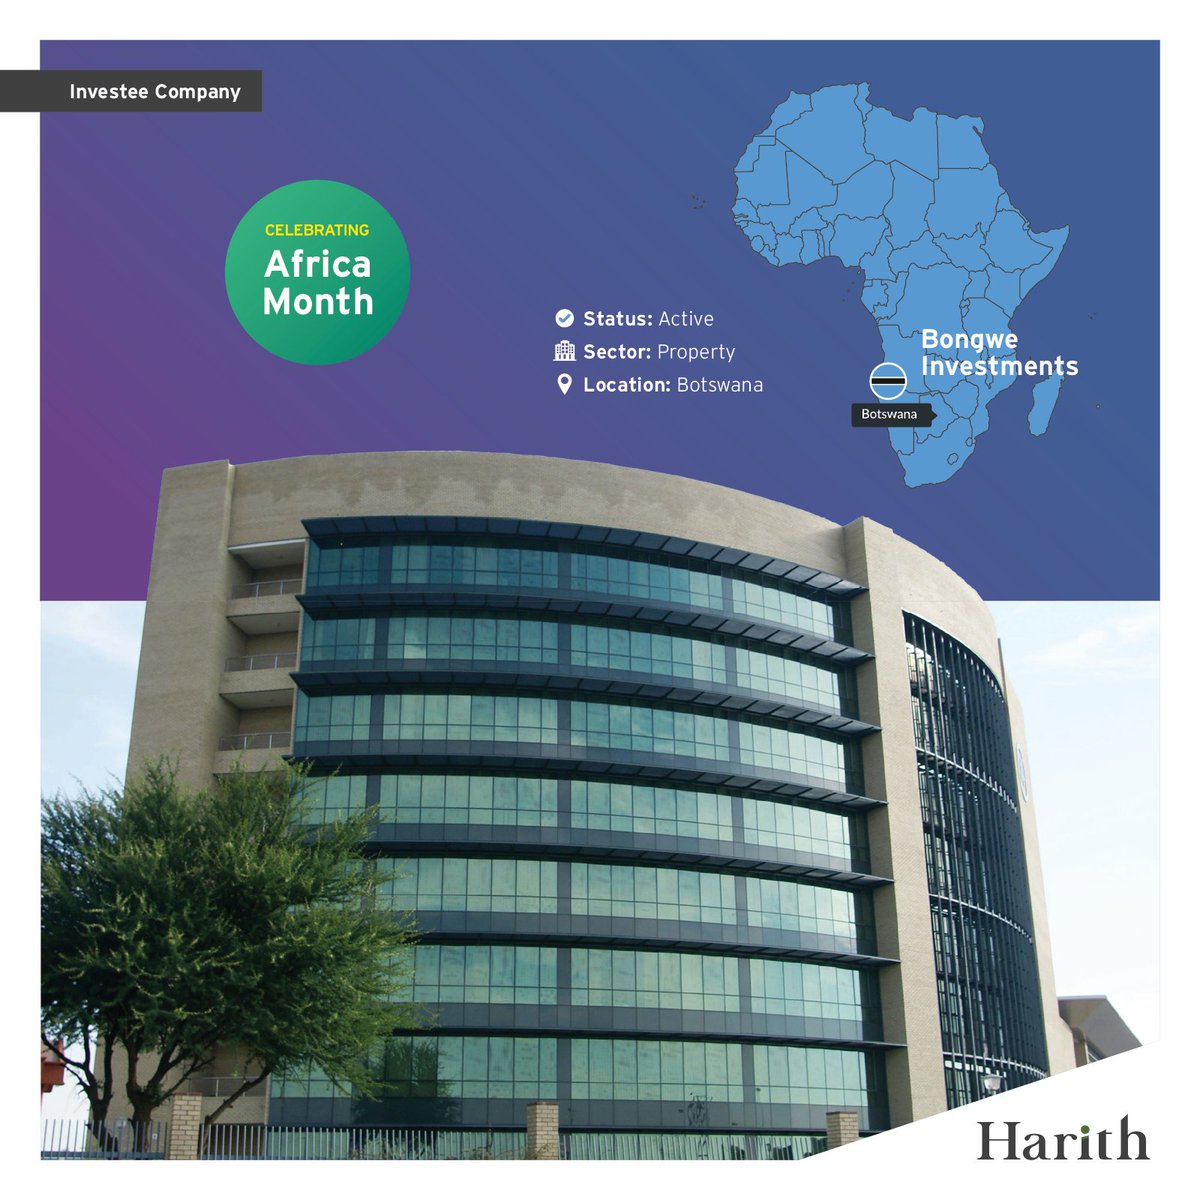 Harith partners with Bongwe Investments in Botswana to build the new SADC head office in Gaborone. This key infrastructure project will boost regional development by enhancing the operational capacity of the SADC Secretariat and promoting collaboration.#HarithInvestsAfrica